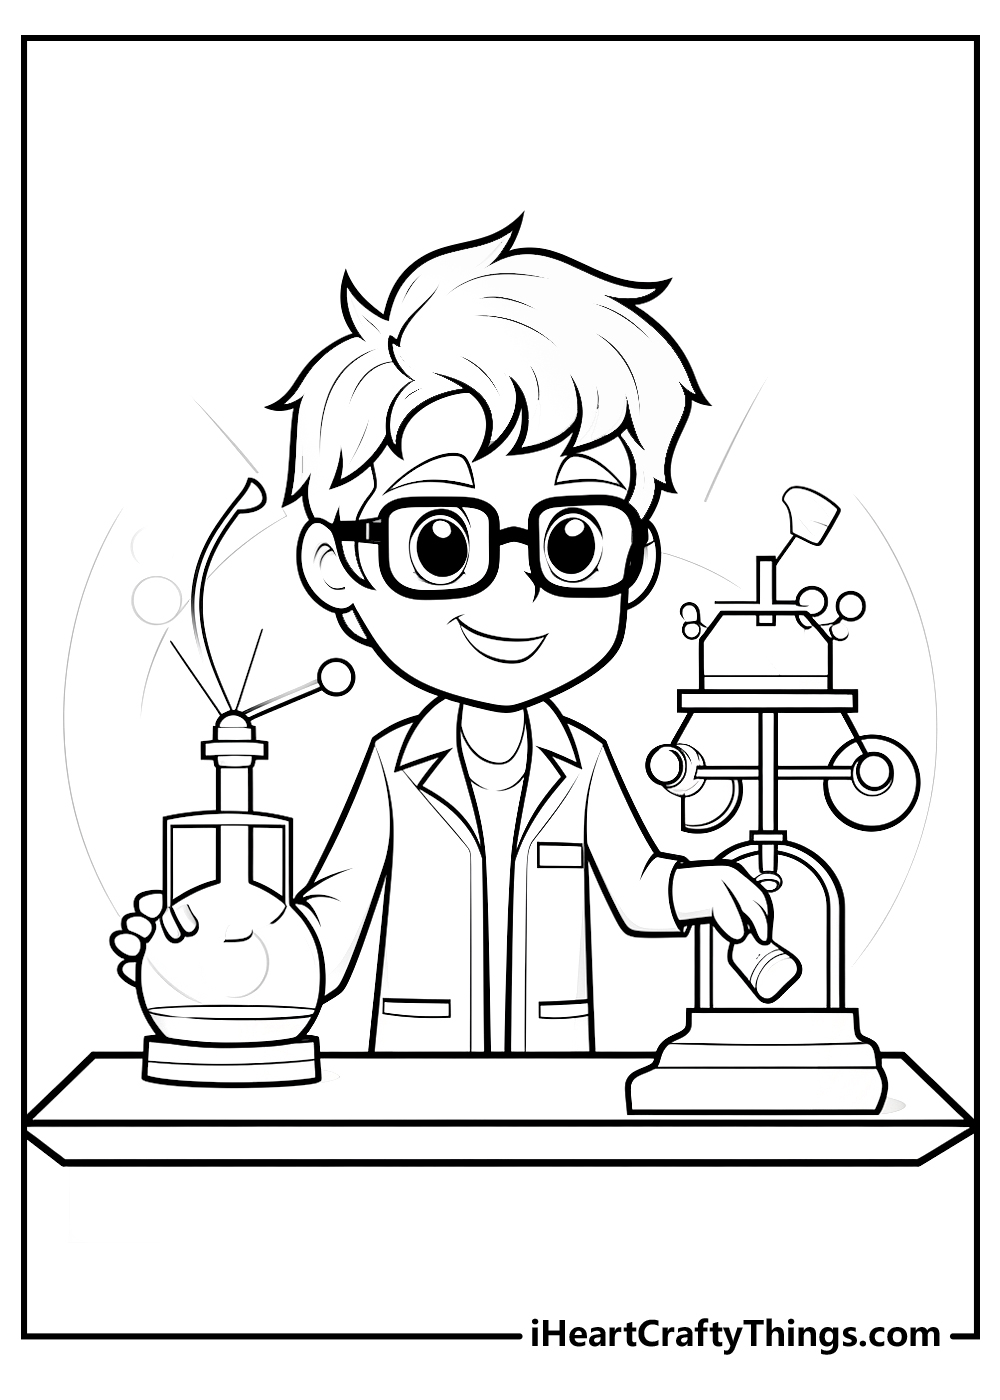 ryan coloring pages